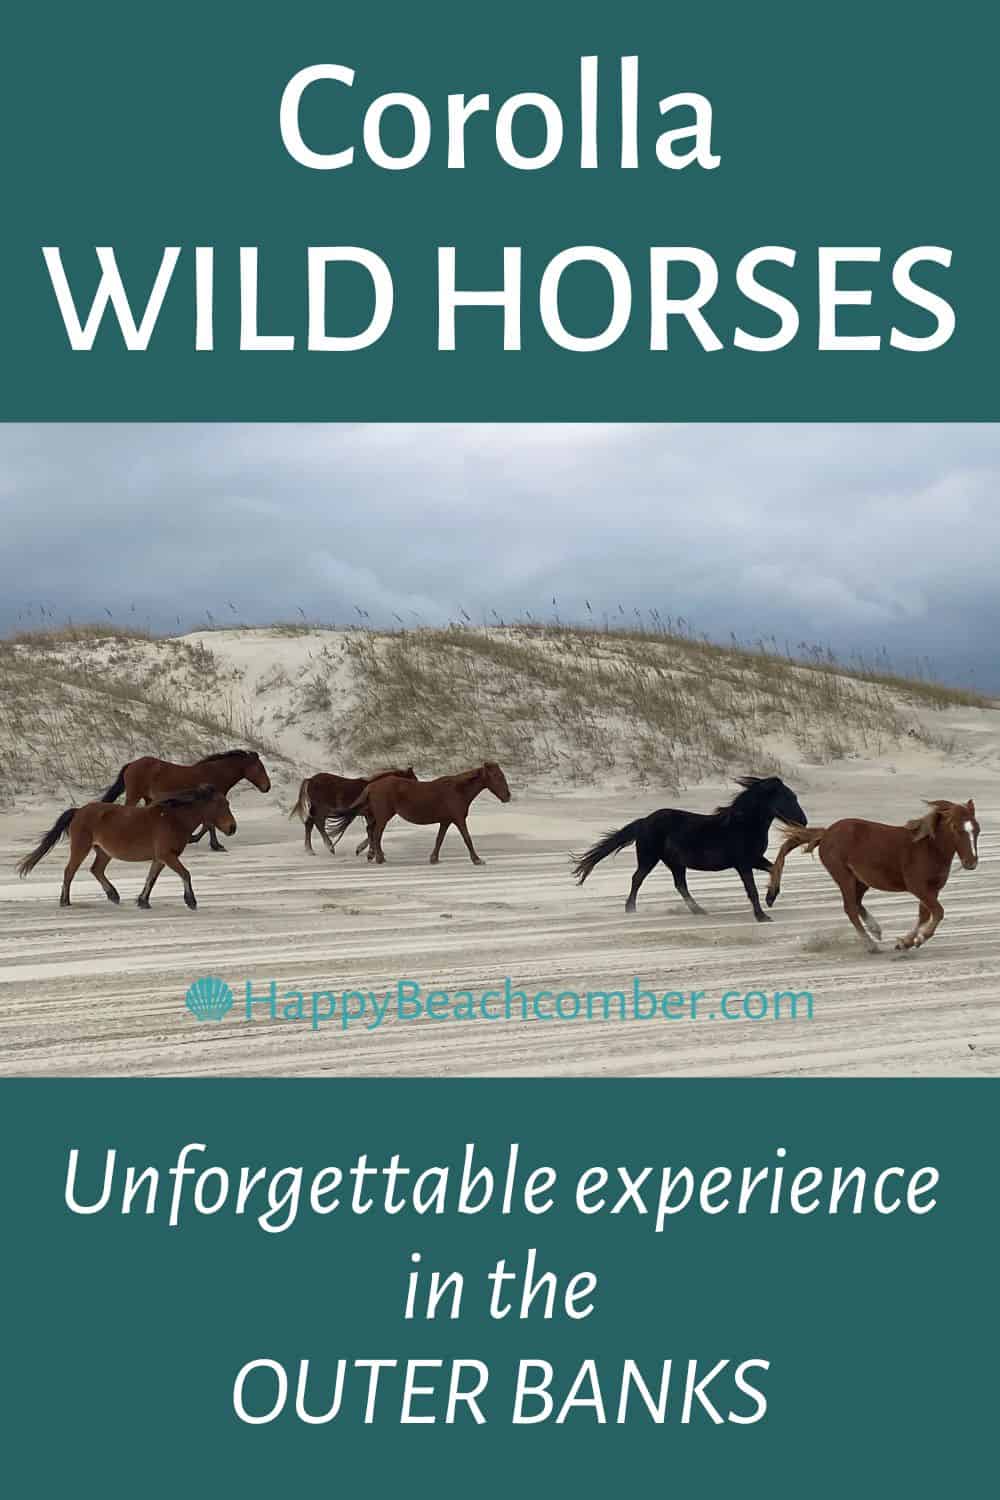 Corolla Wild Horses - Unforgettable experience in the Outer Banks